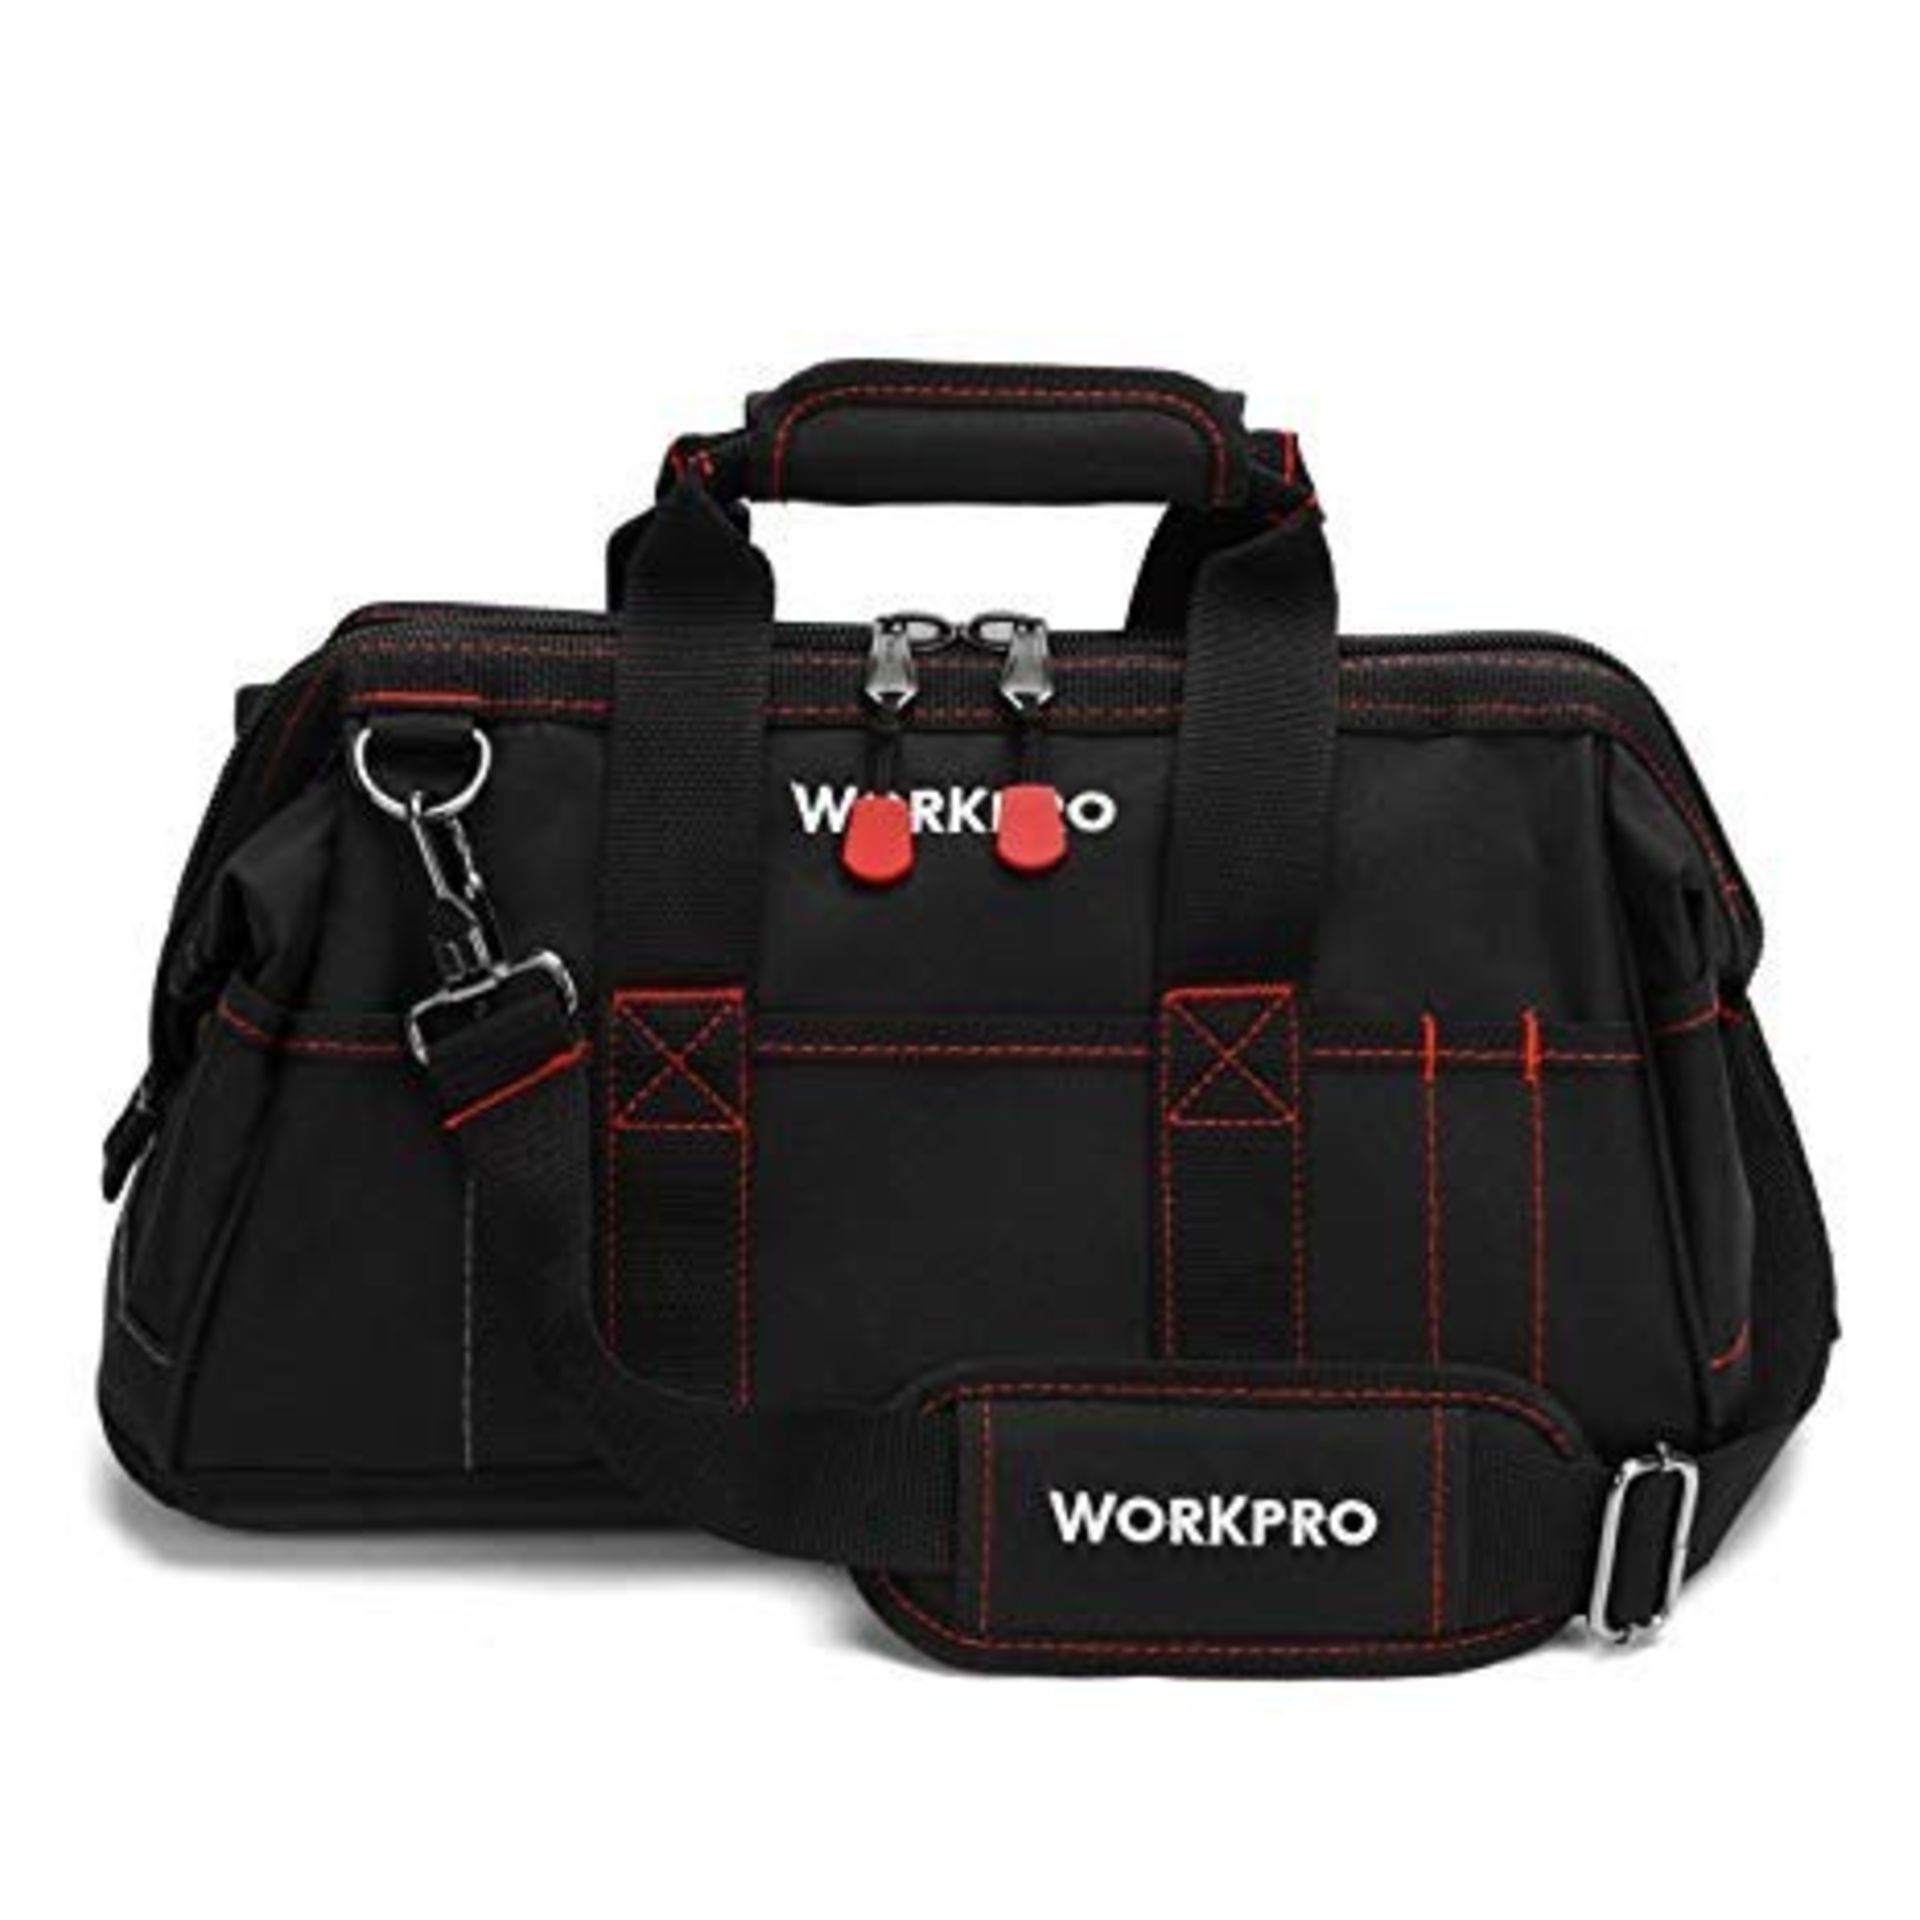 Bagged Brand New Workpro 16" Wide Mouth Tool Bags RRP £23 Each (W081022A)(Comes in 2 Boxes)